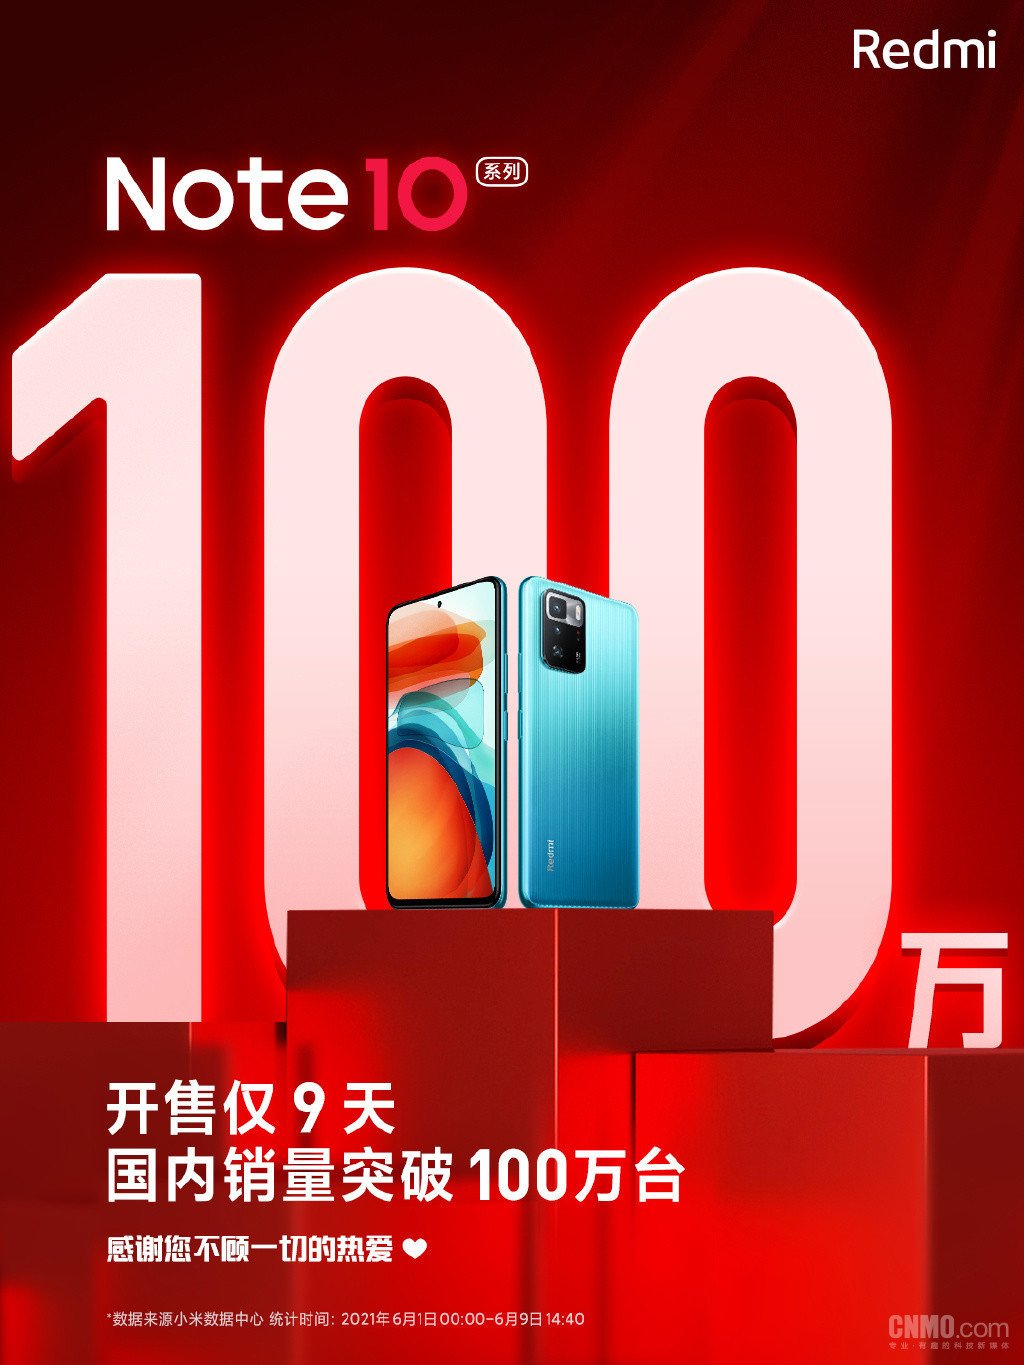 Recently launched Redmi Note 10 exceeds 1 million sales after 9 days of launch | DroidAfrica